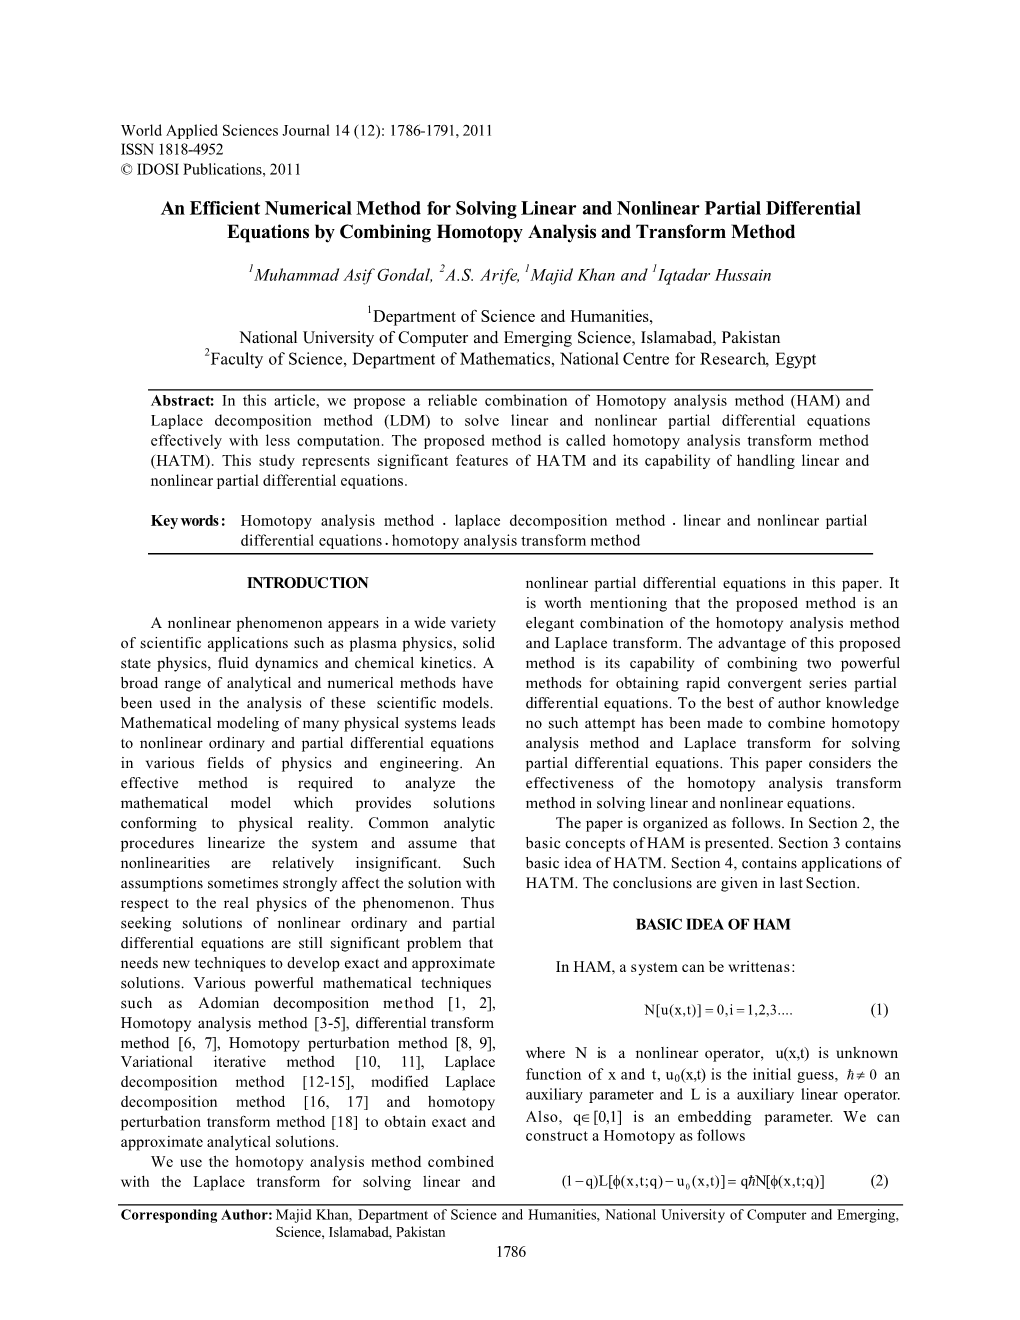 An Efficient Numerical Method for Solving Linear and Nonlinear Partial Differential Equations by Combining Homotopy Analysis and Transform Method